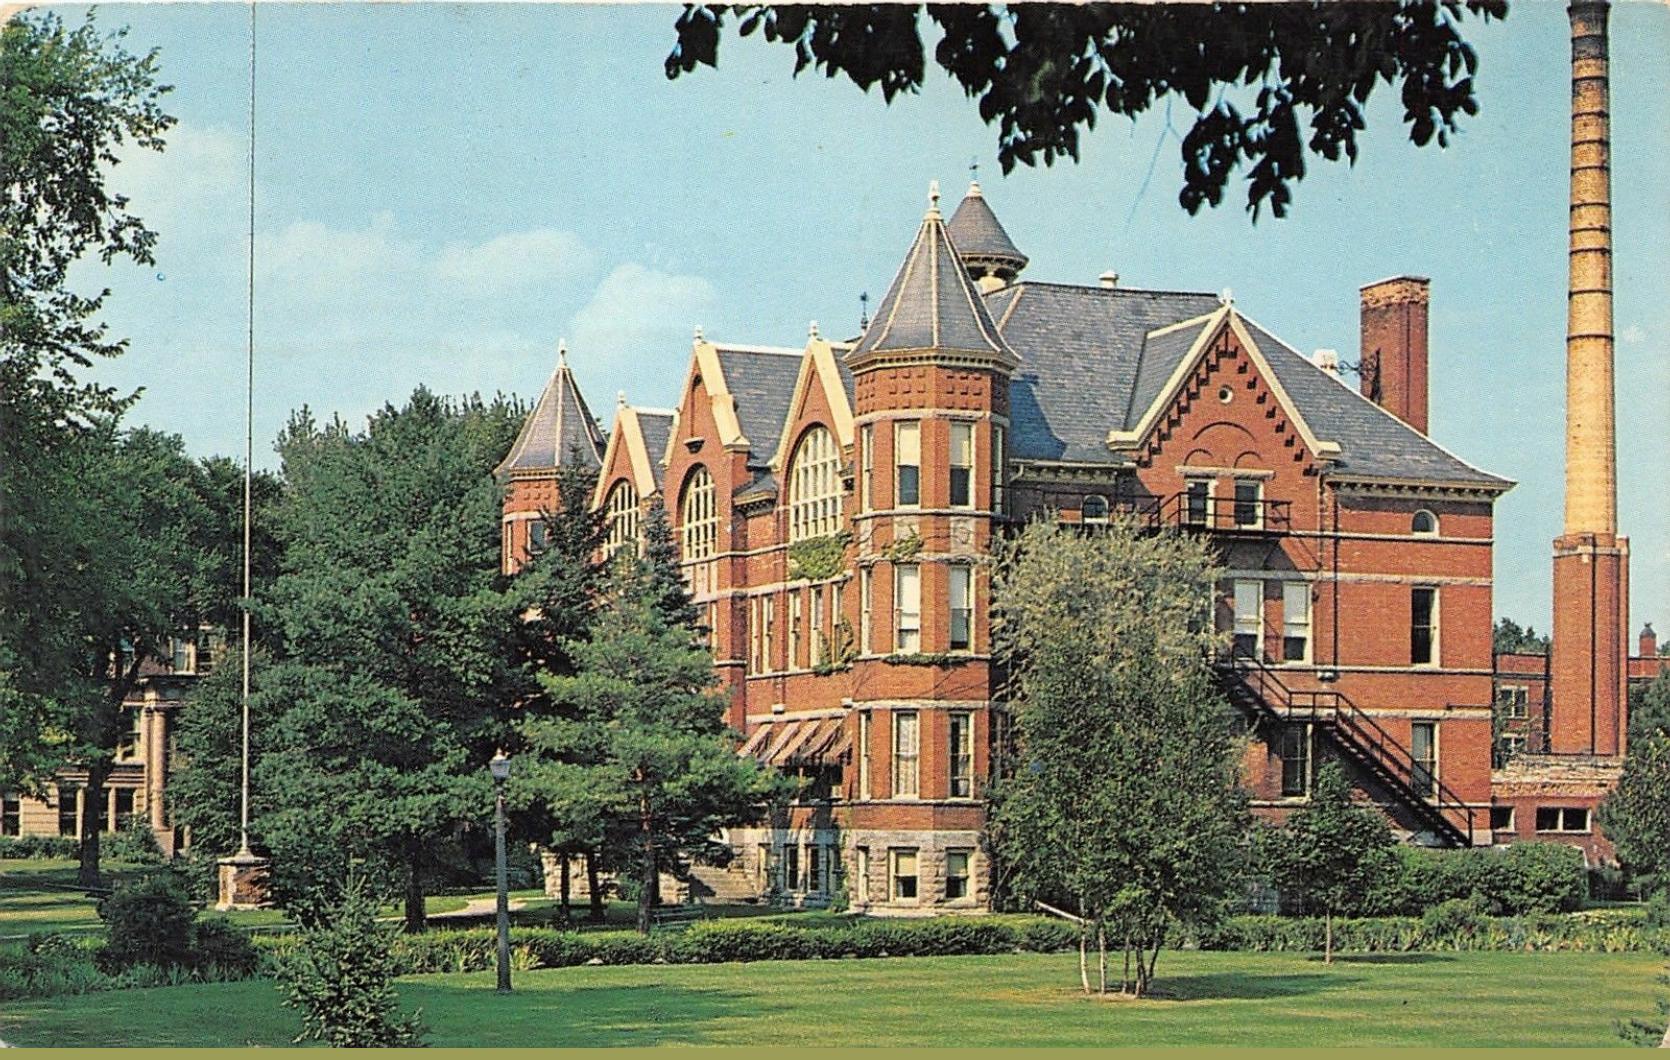 St. Norbert College, Main Hall • UNKNOWN YEAR